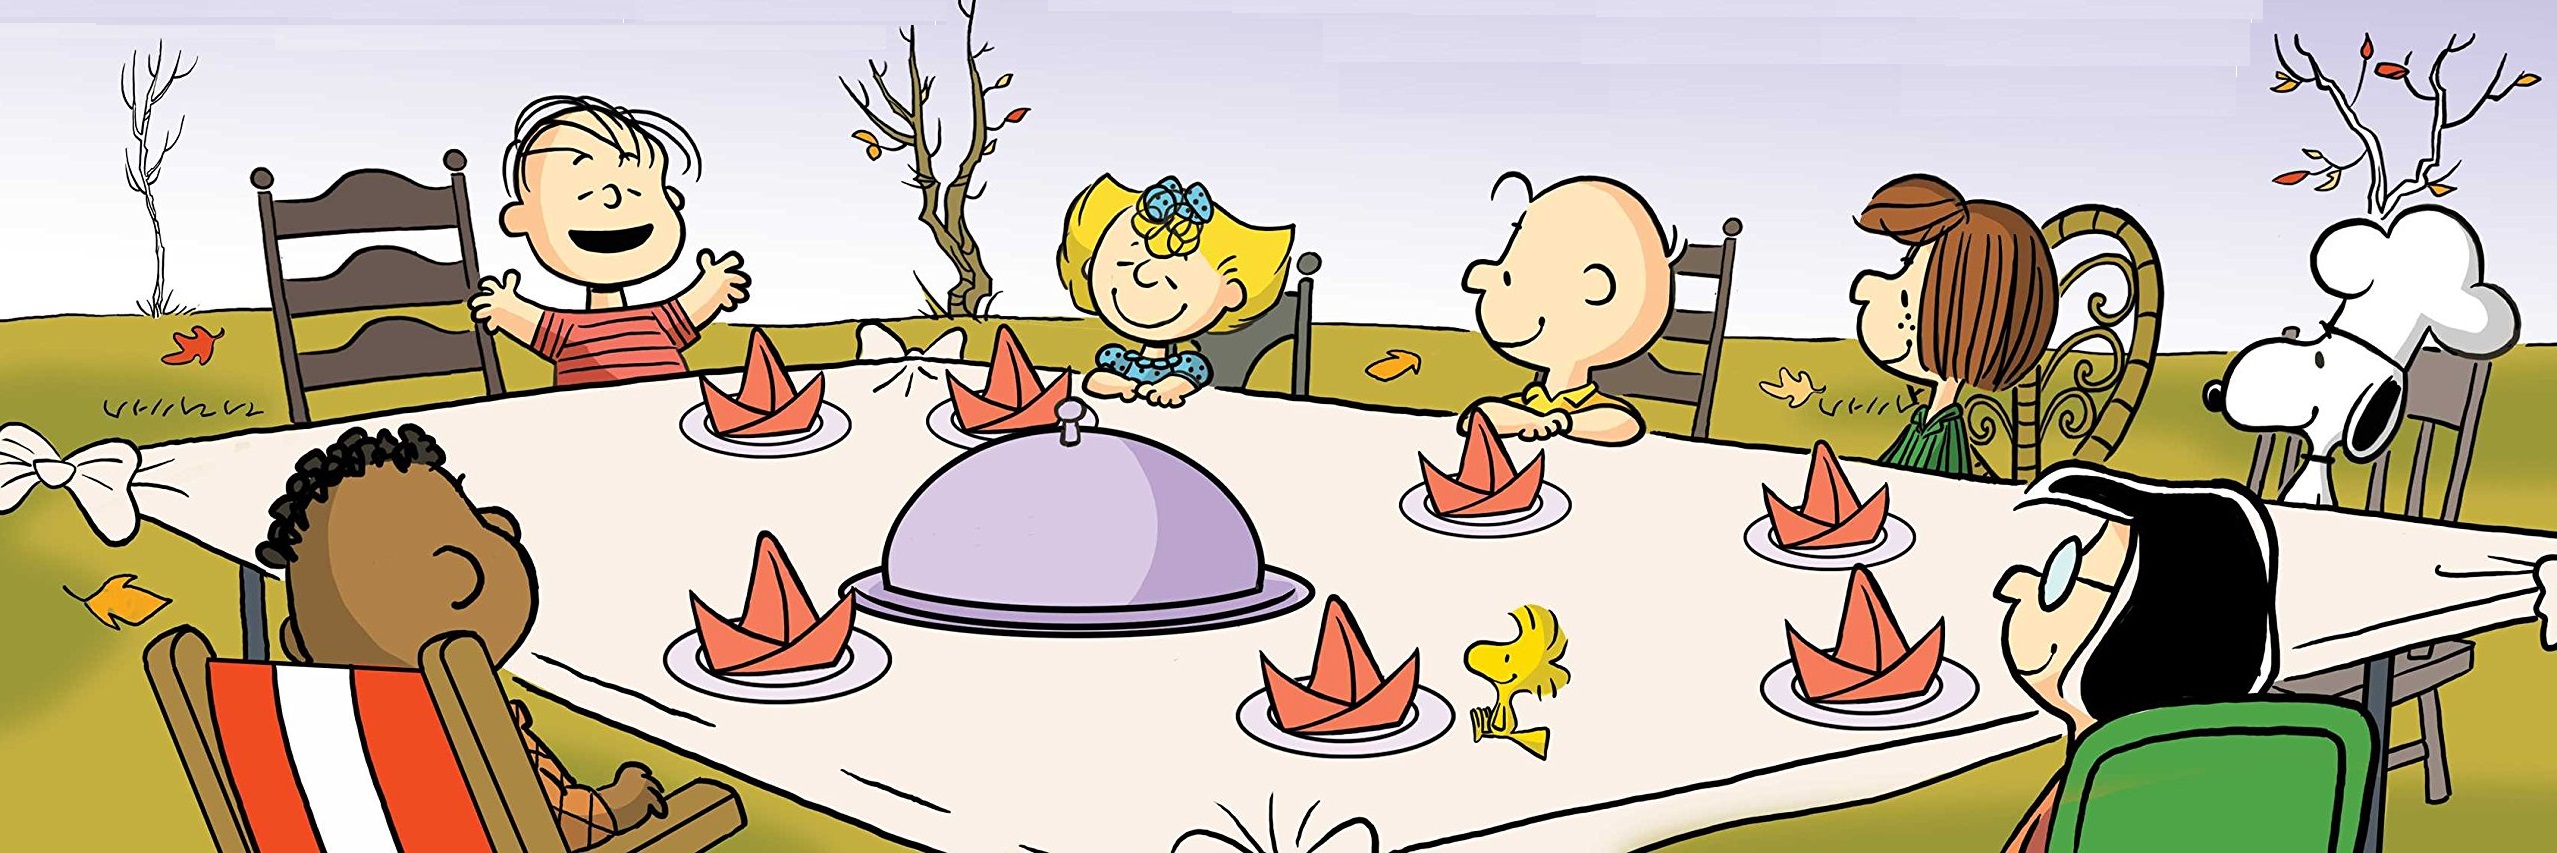 Charlie Brown Thanksgiving Background